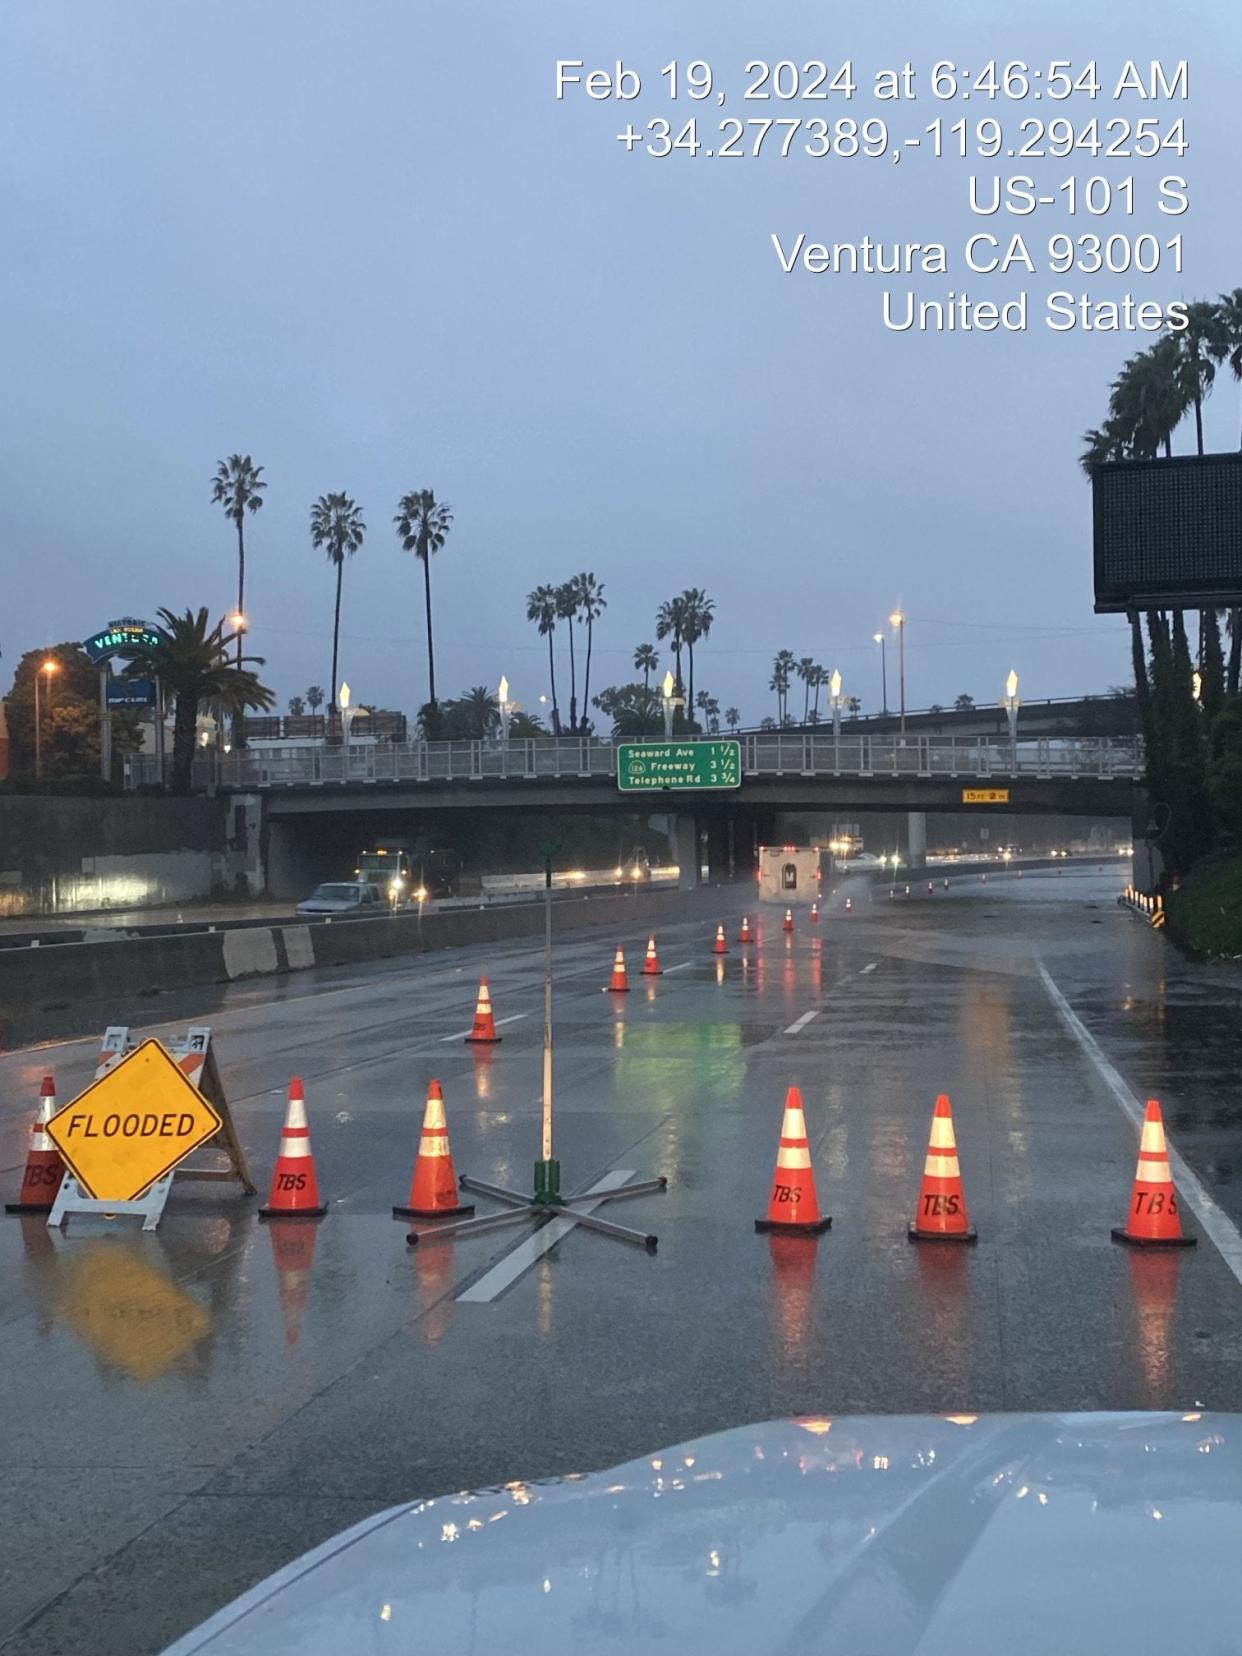 Cones and signs block off a portion os US-101 in Ventura, California as heavy rain pours down (California Department of Transportation)